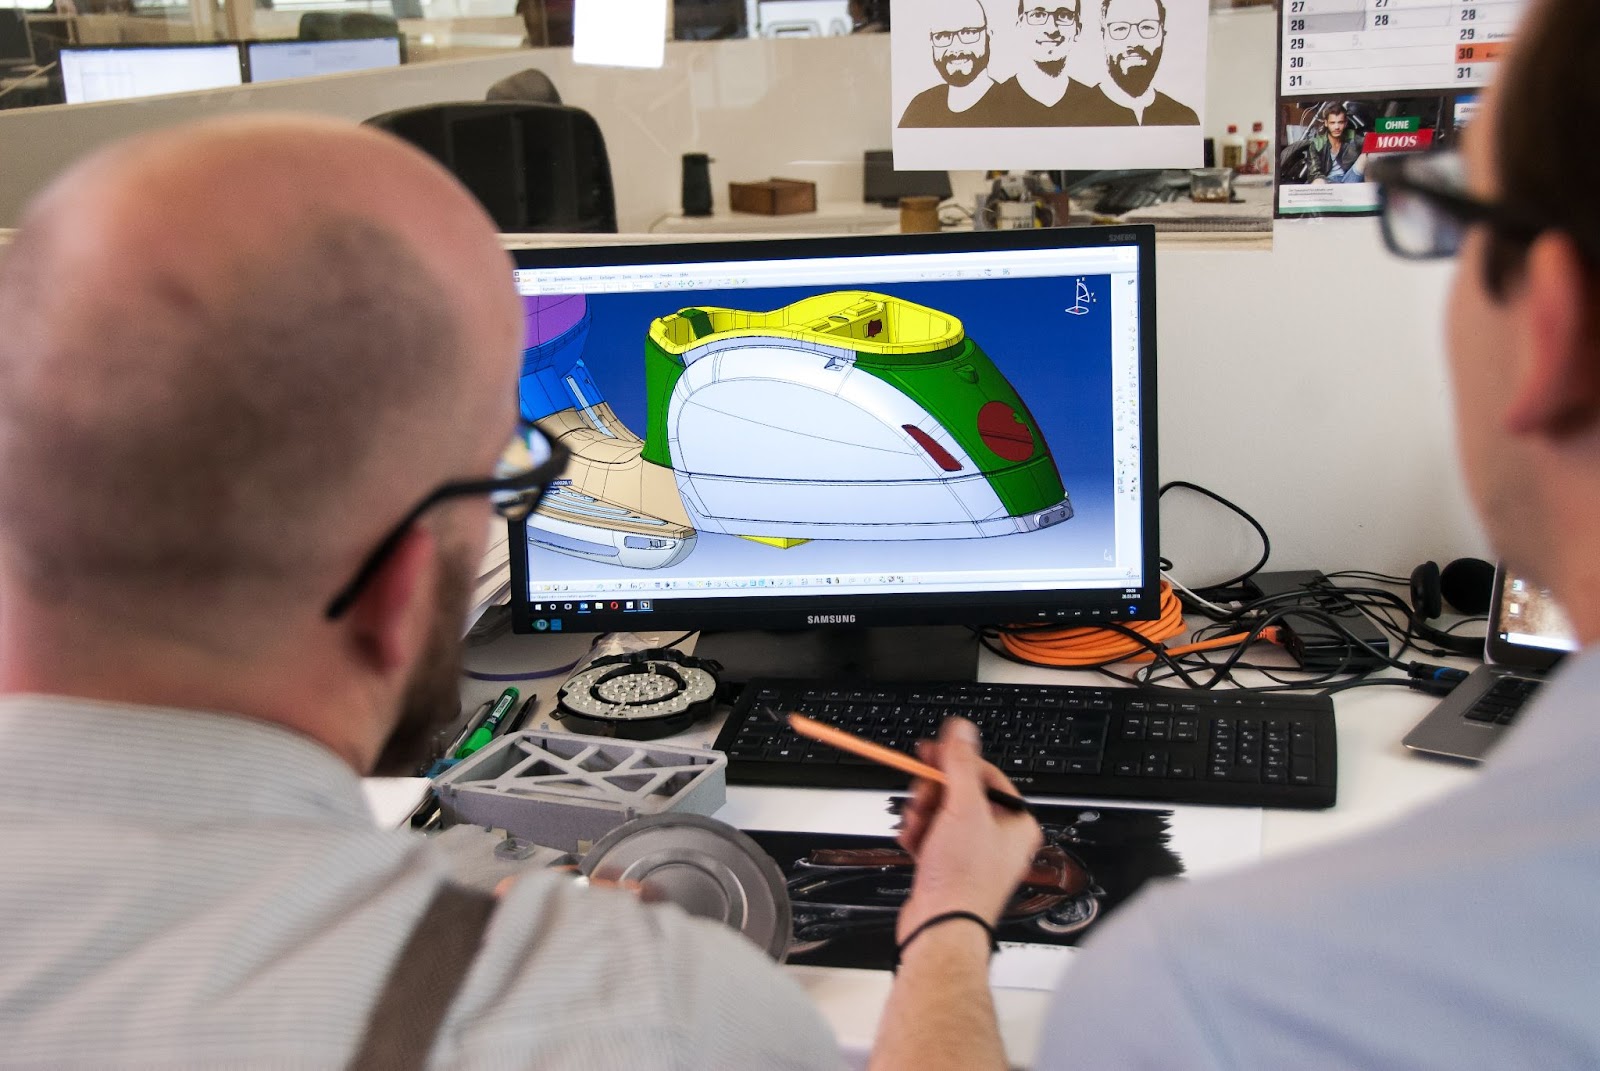 6 Factors For Choosing The Right CAD Program For Product Design